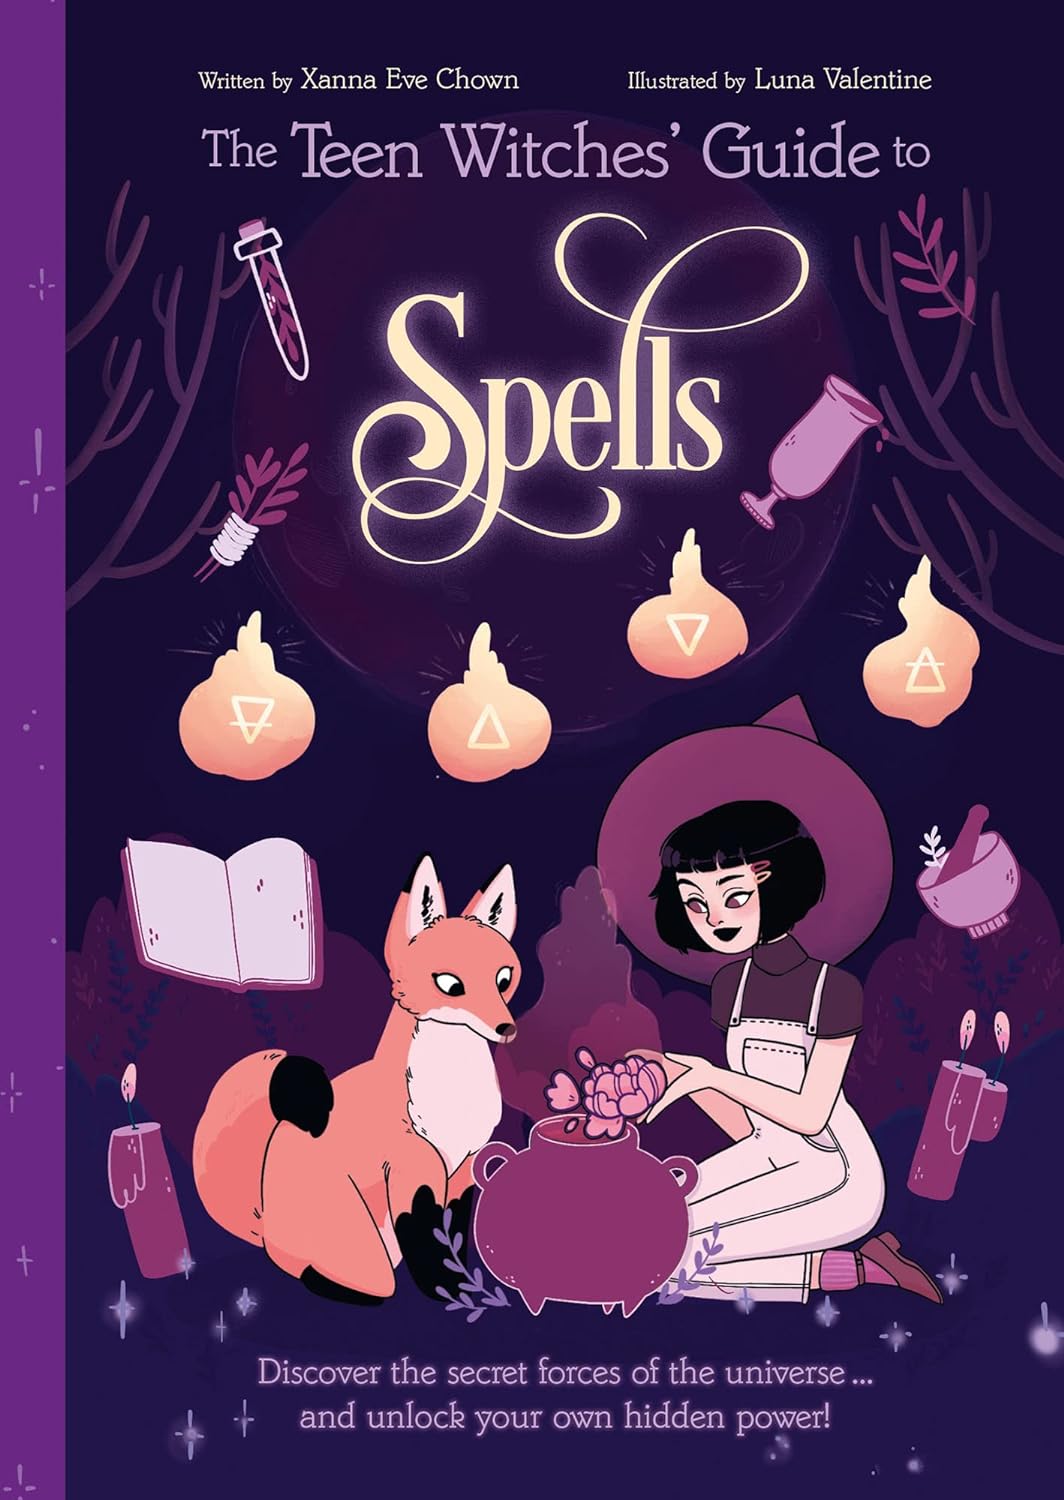 The Teen Witch's Guide to Spells